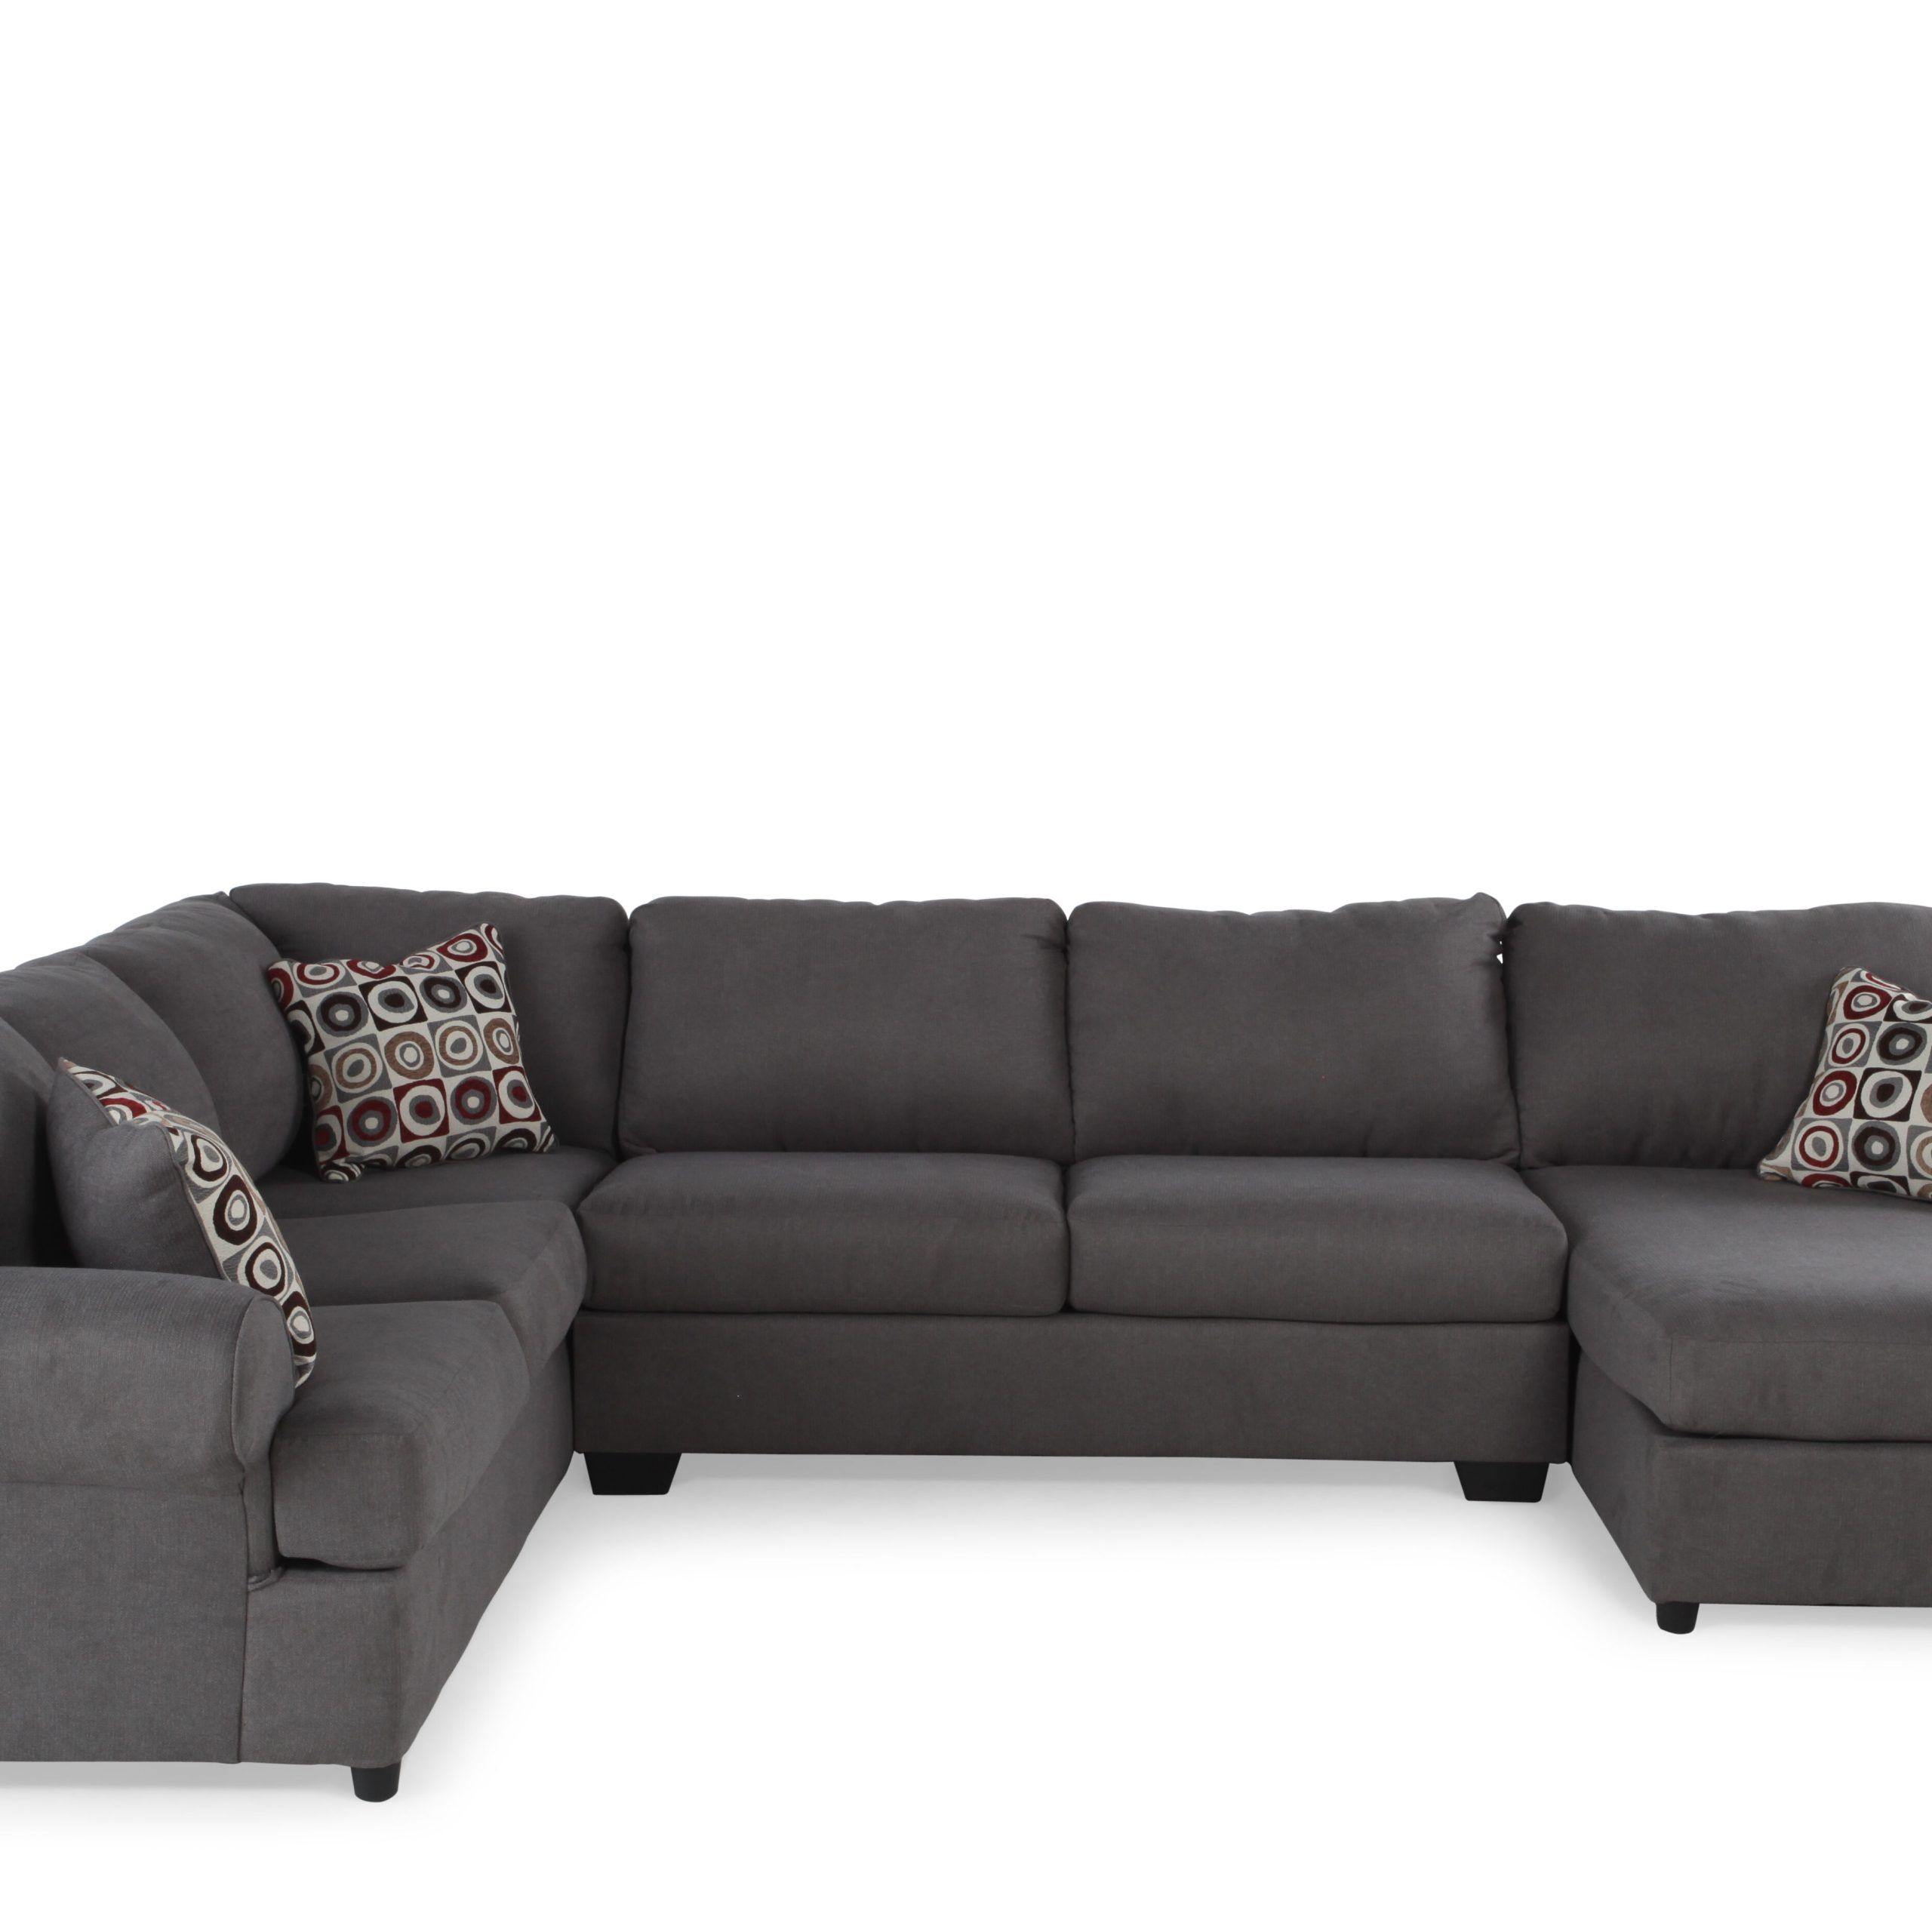 Three Piece Microfiber 93" Sectional In Dark Gray | Mathis Brothers Within Microfiber Sectional Corner Sofas (View 19 of 20)